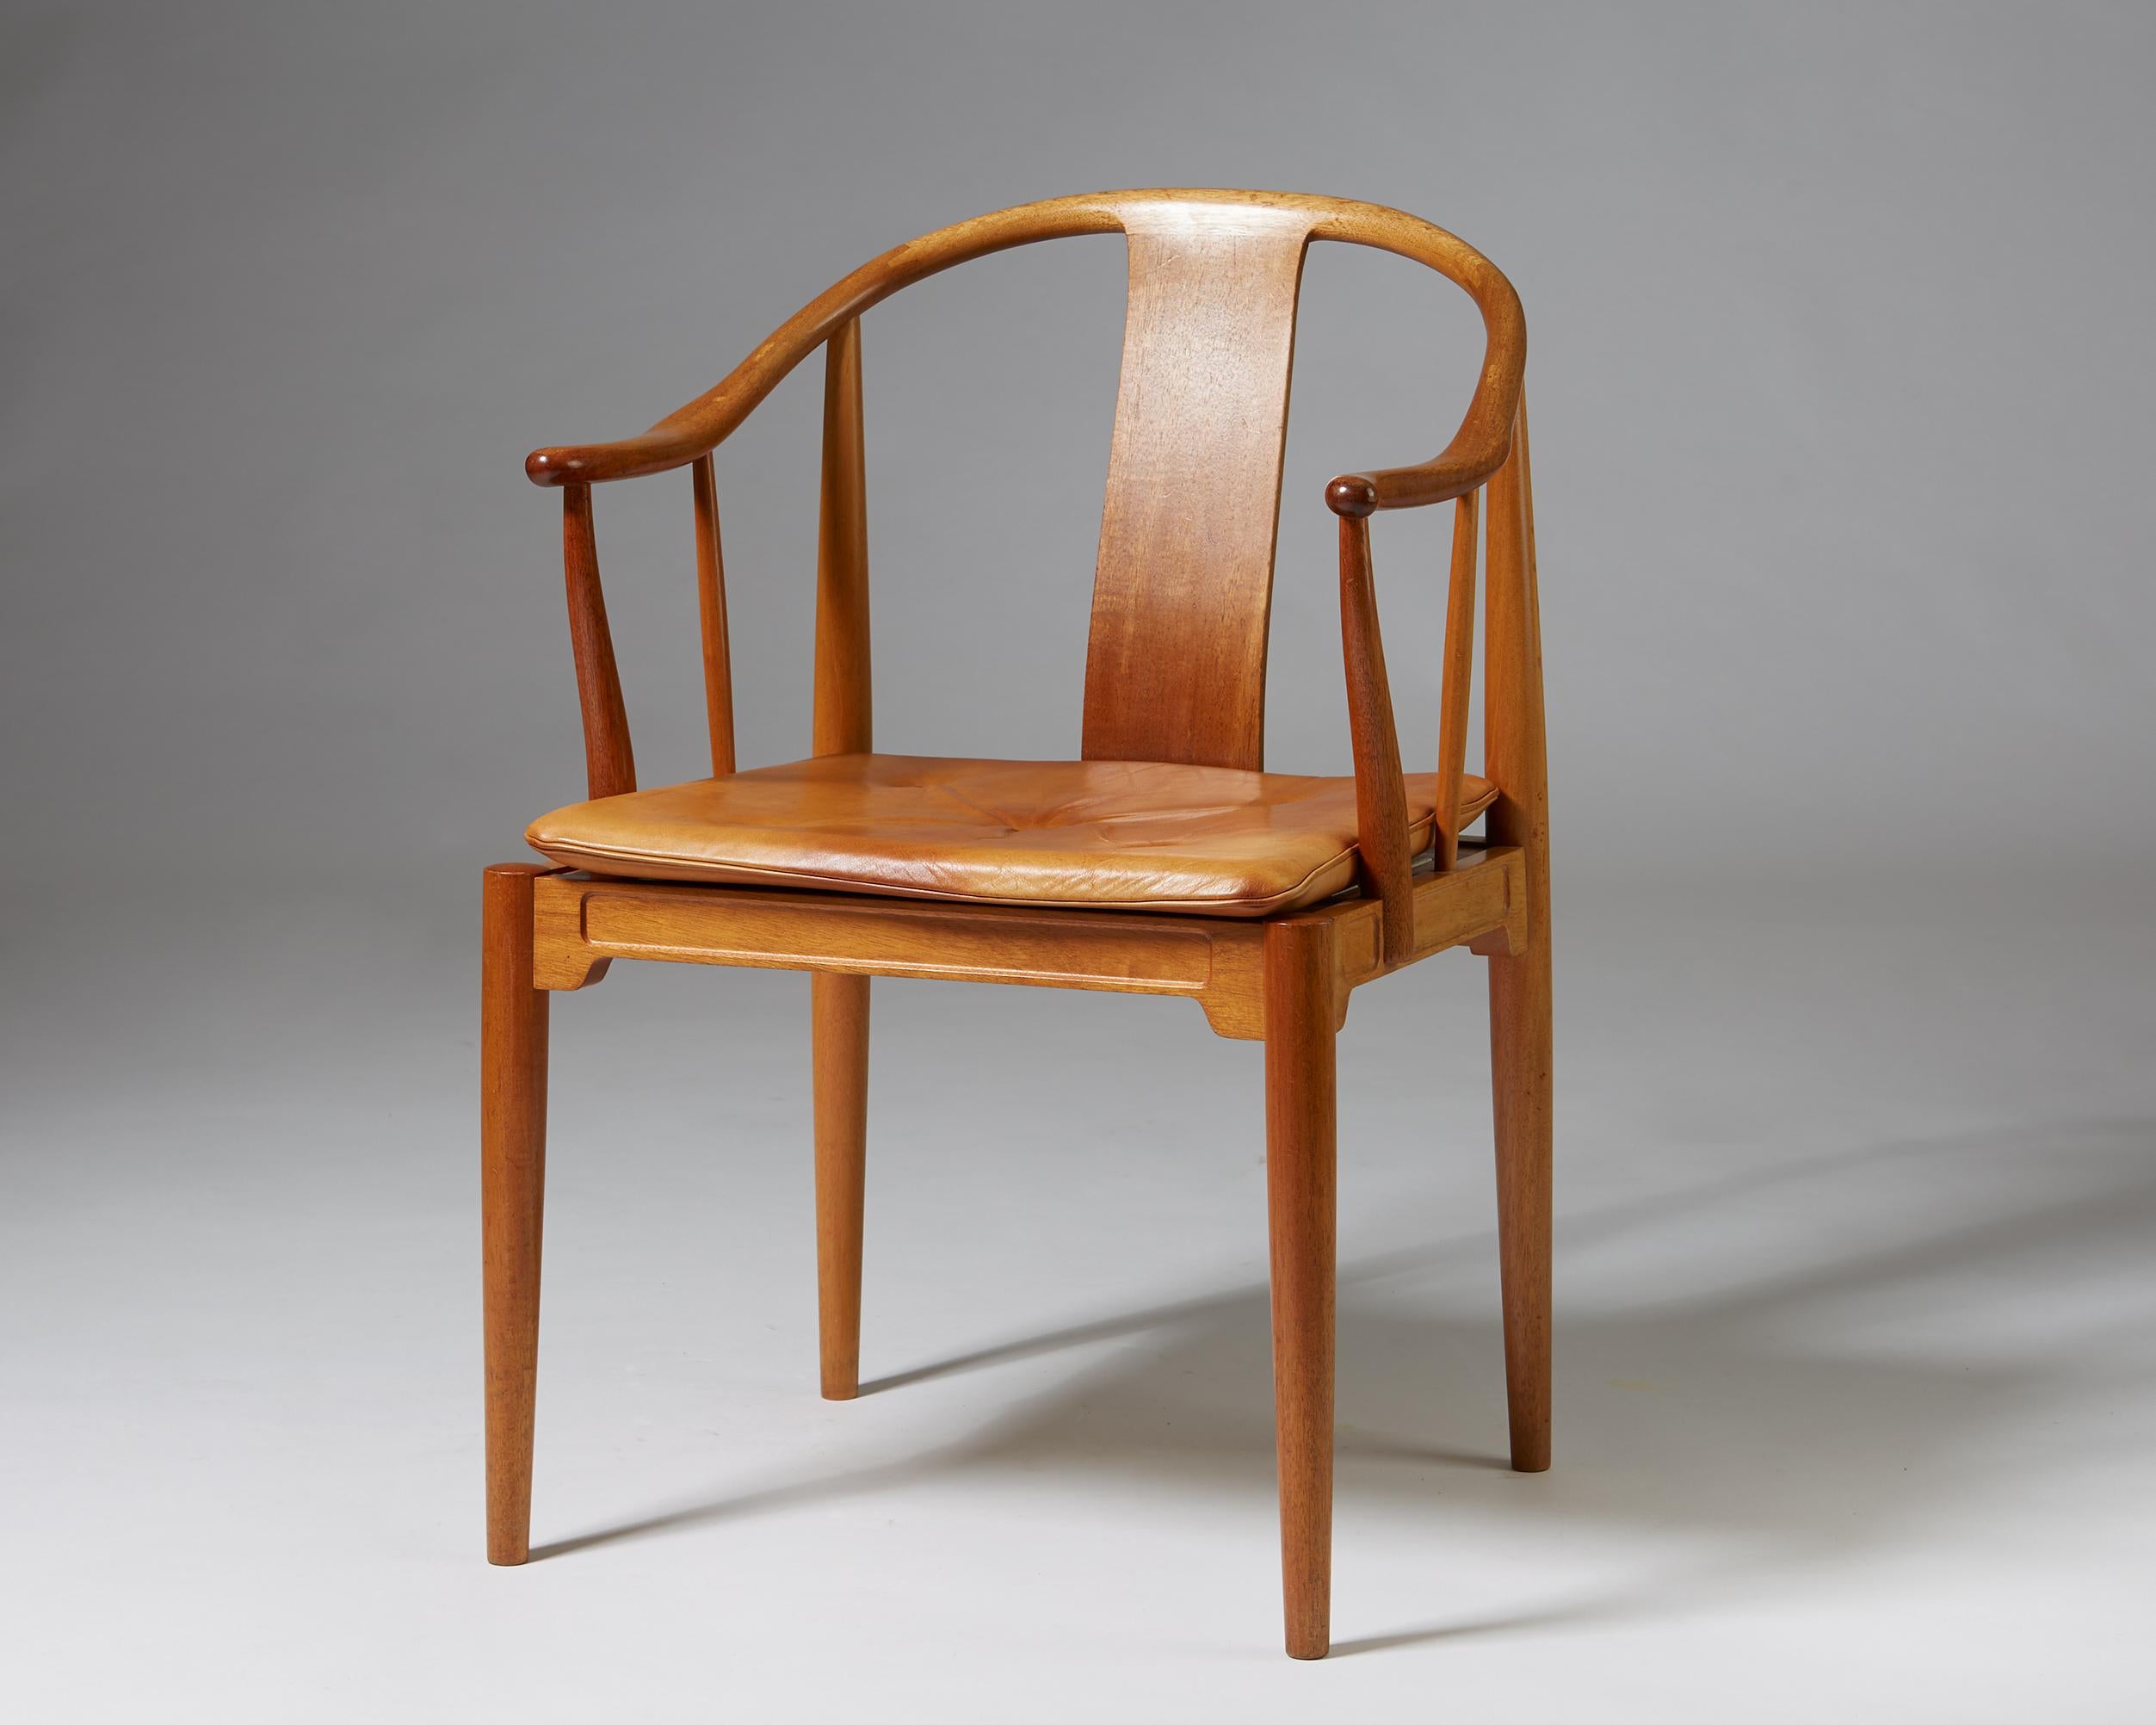 Mahogany and leather chair designed by Hans J. Wegner.
 